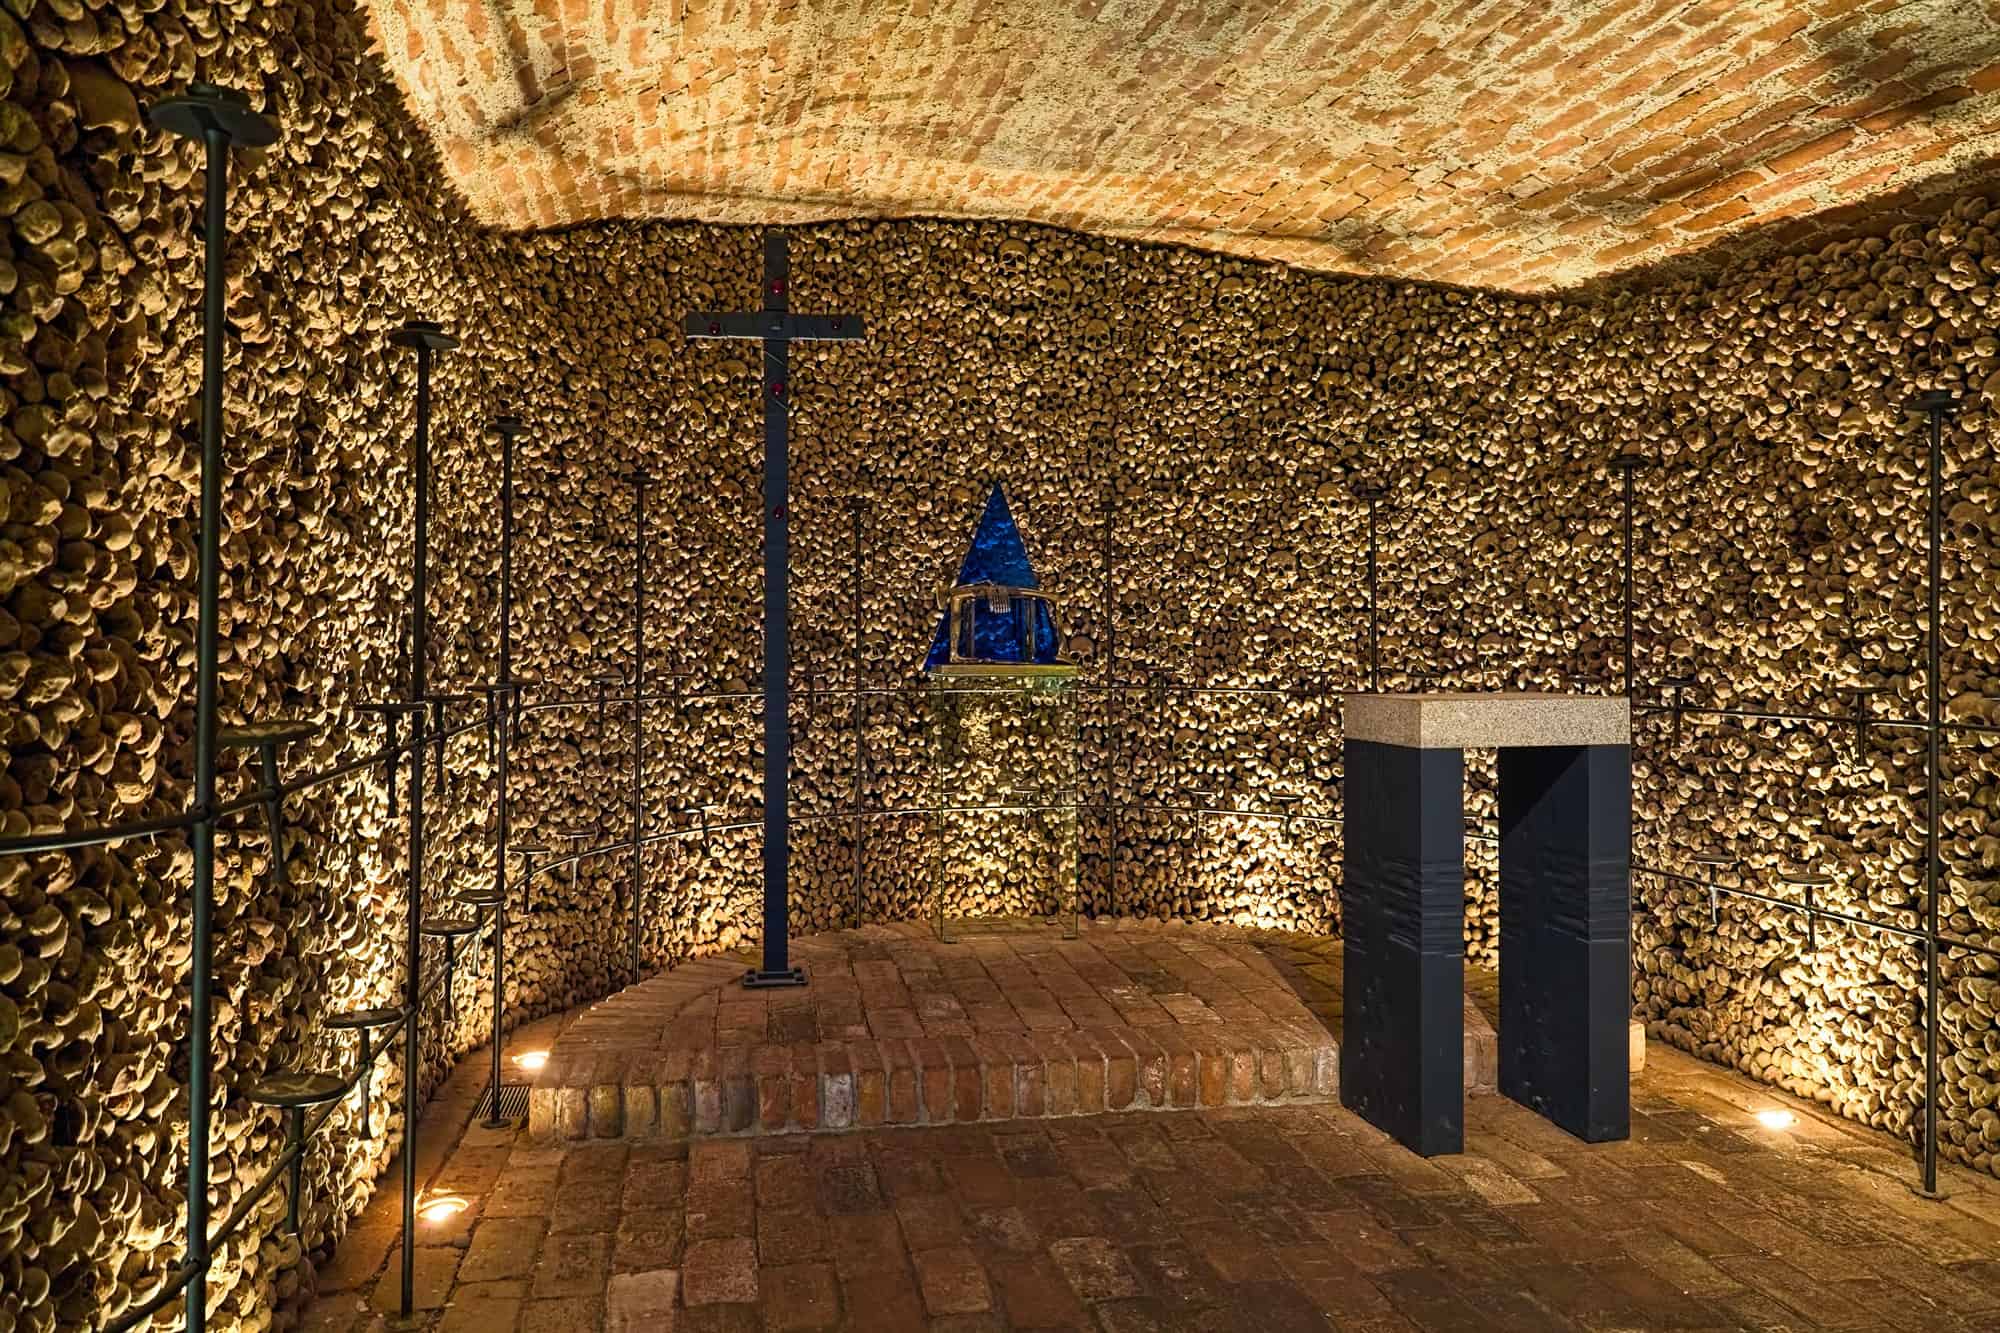 The Brno Ossuary catacomb wasn't discovered until 2001.